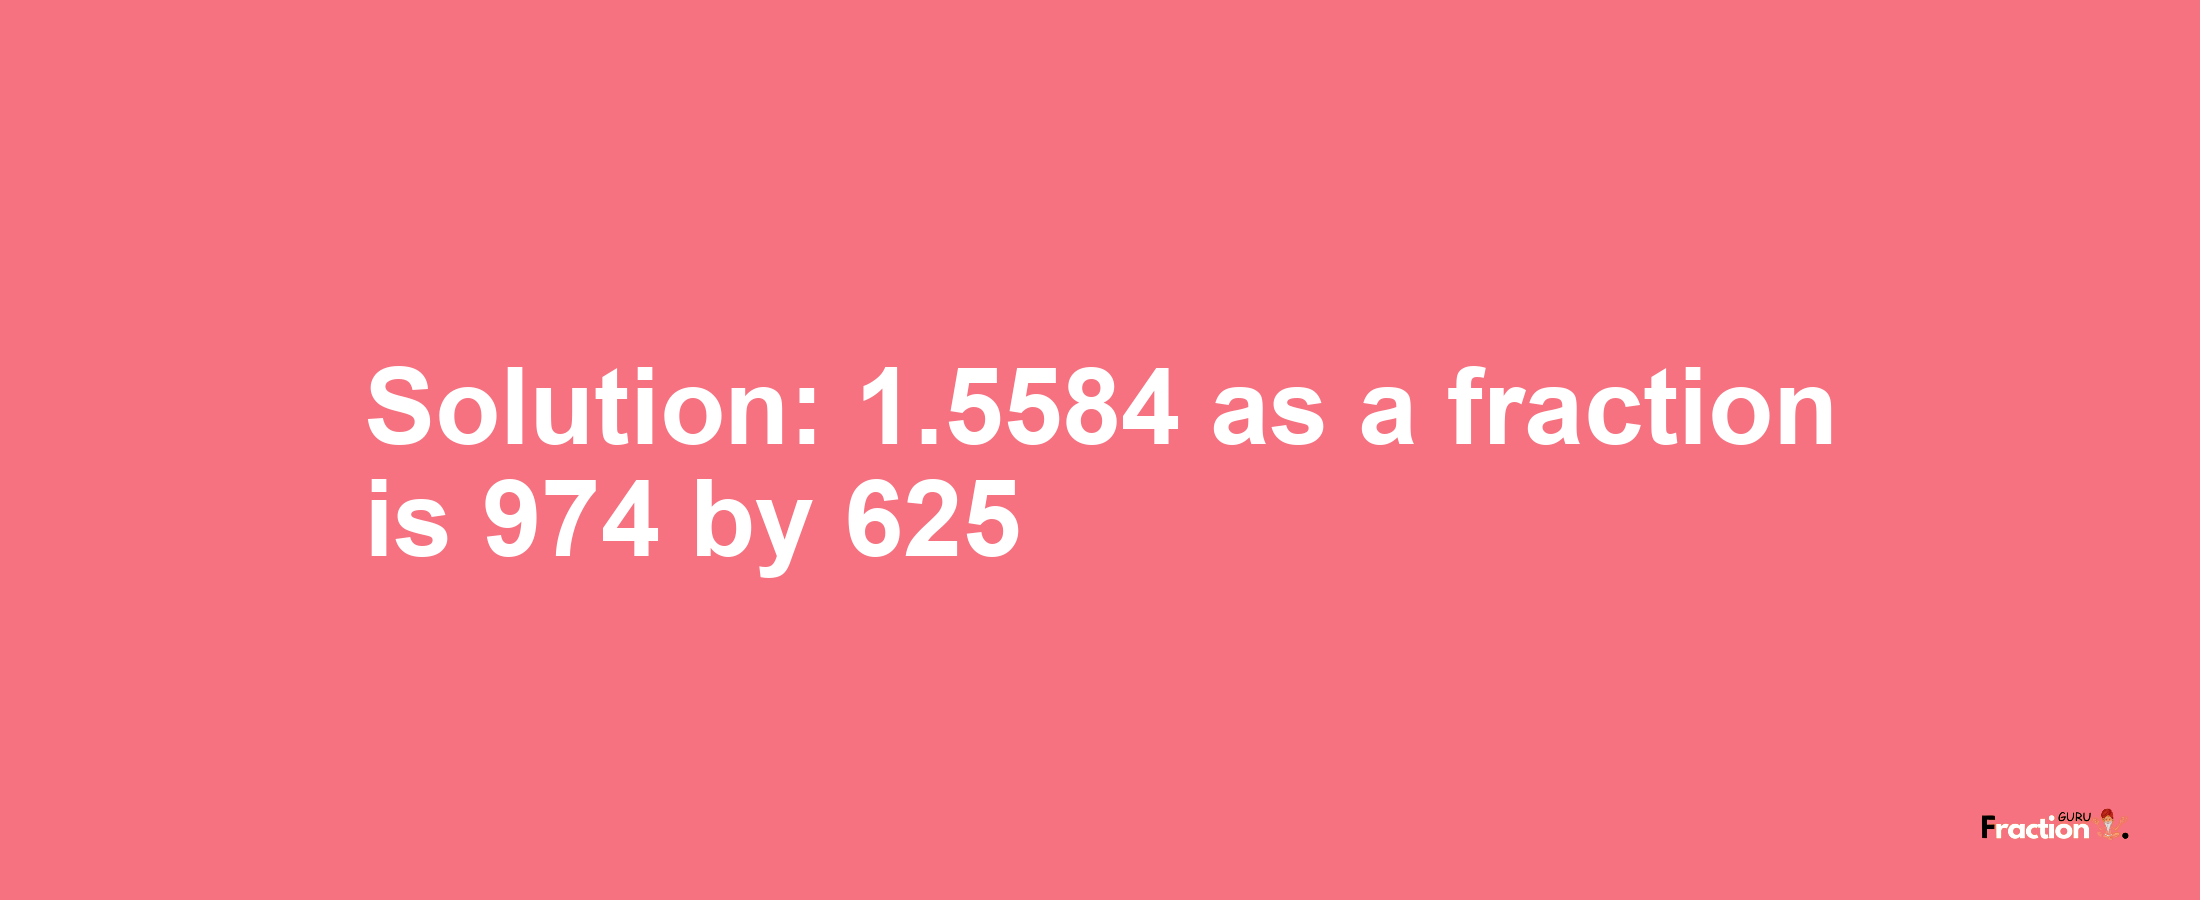 Solution:1.5584 as a fraction is 974/625